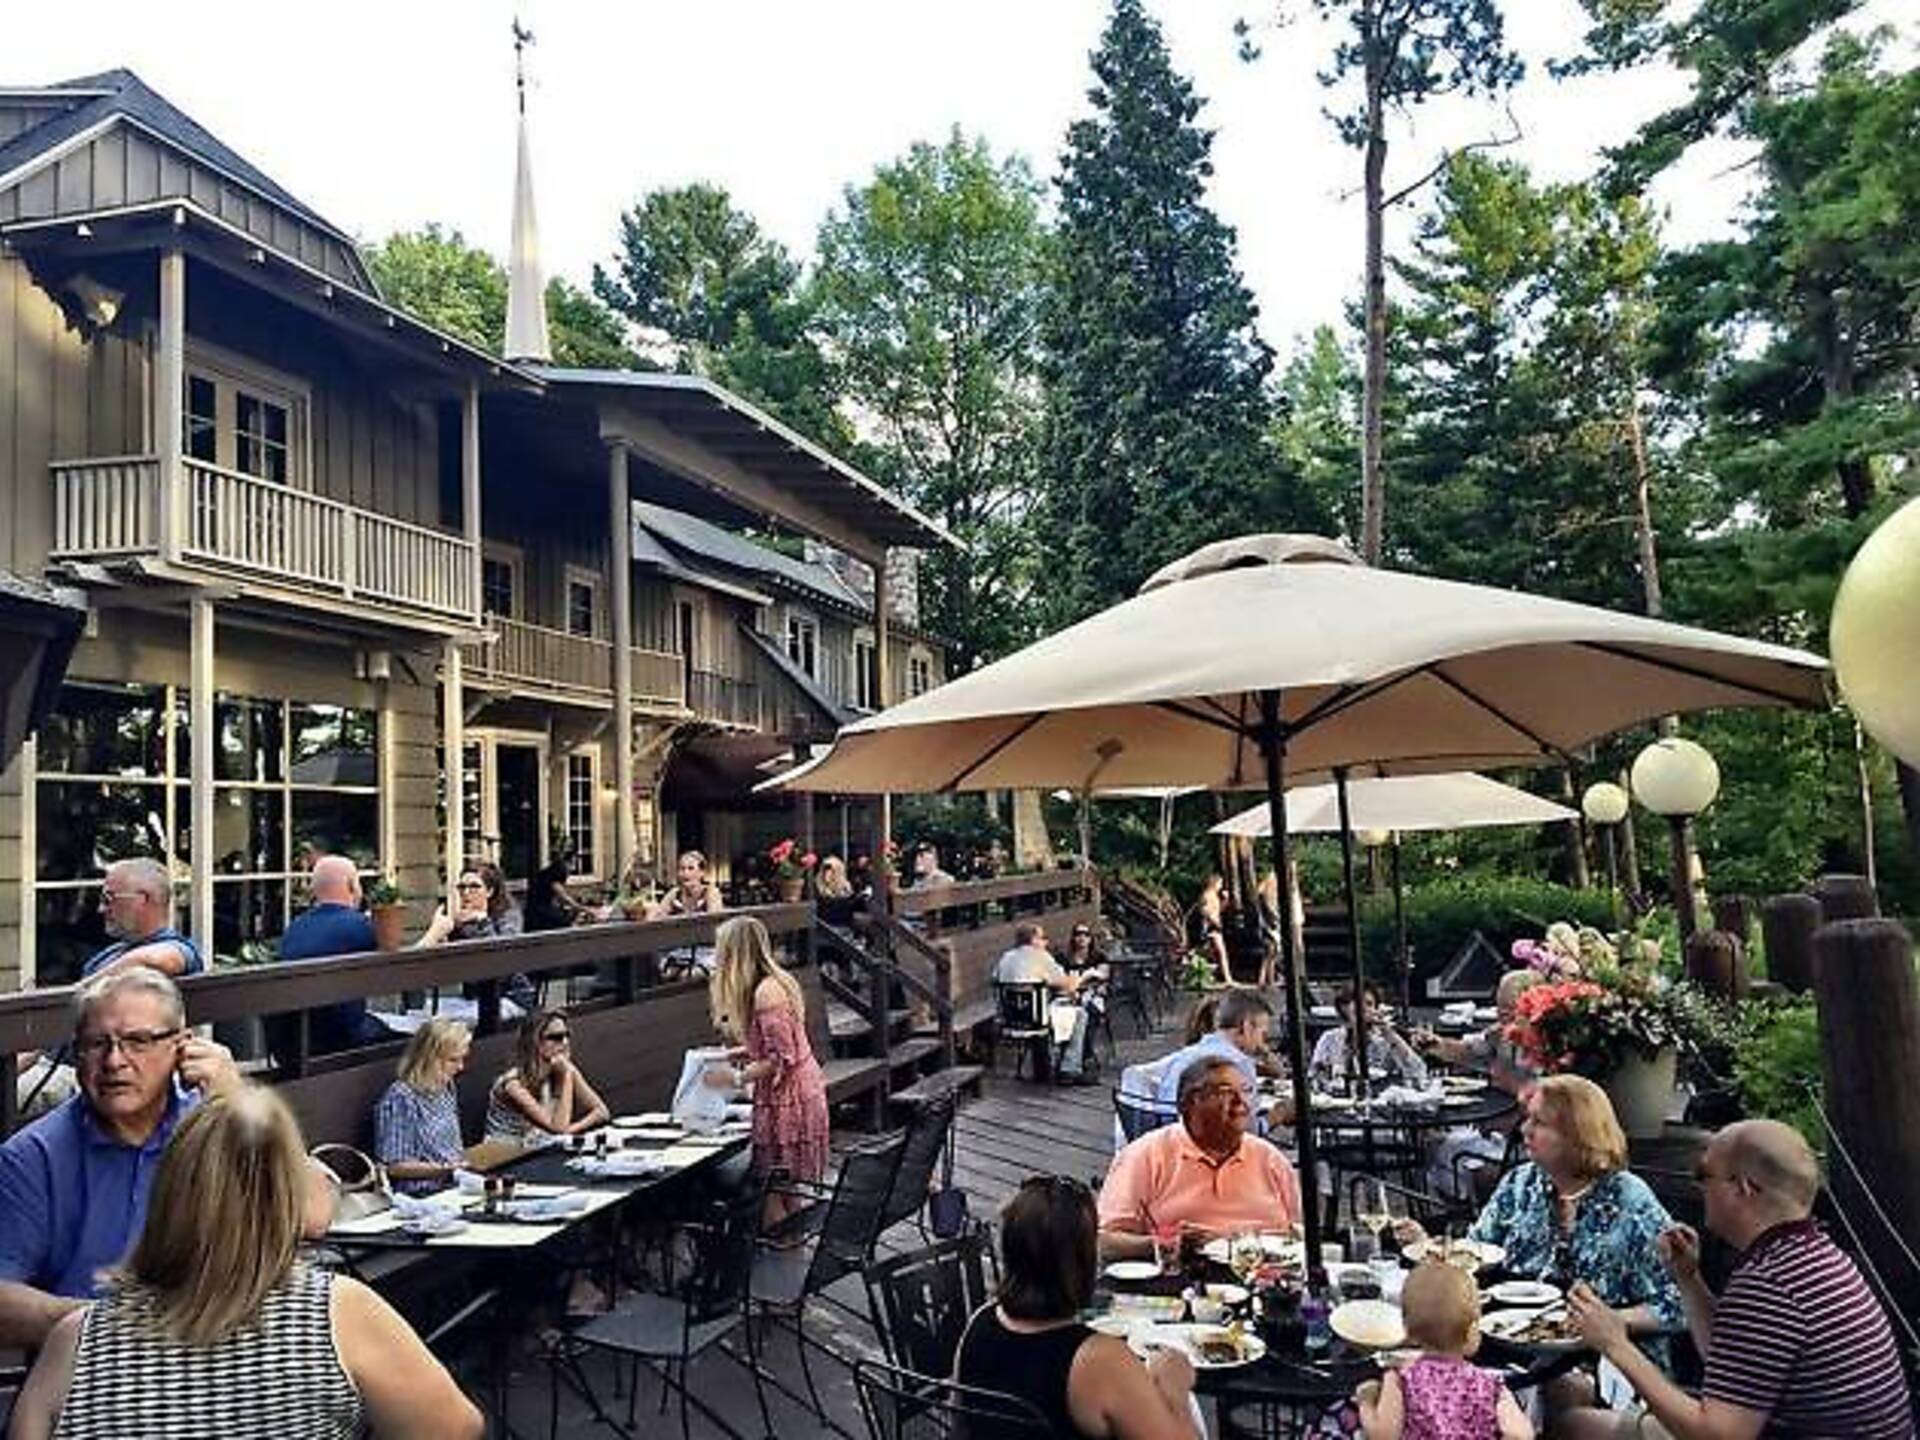 10 Best Restaurants in Traverse City for a Delicious Meal